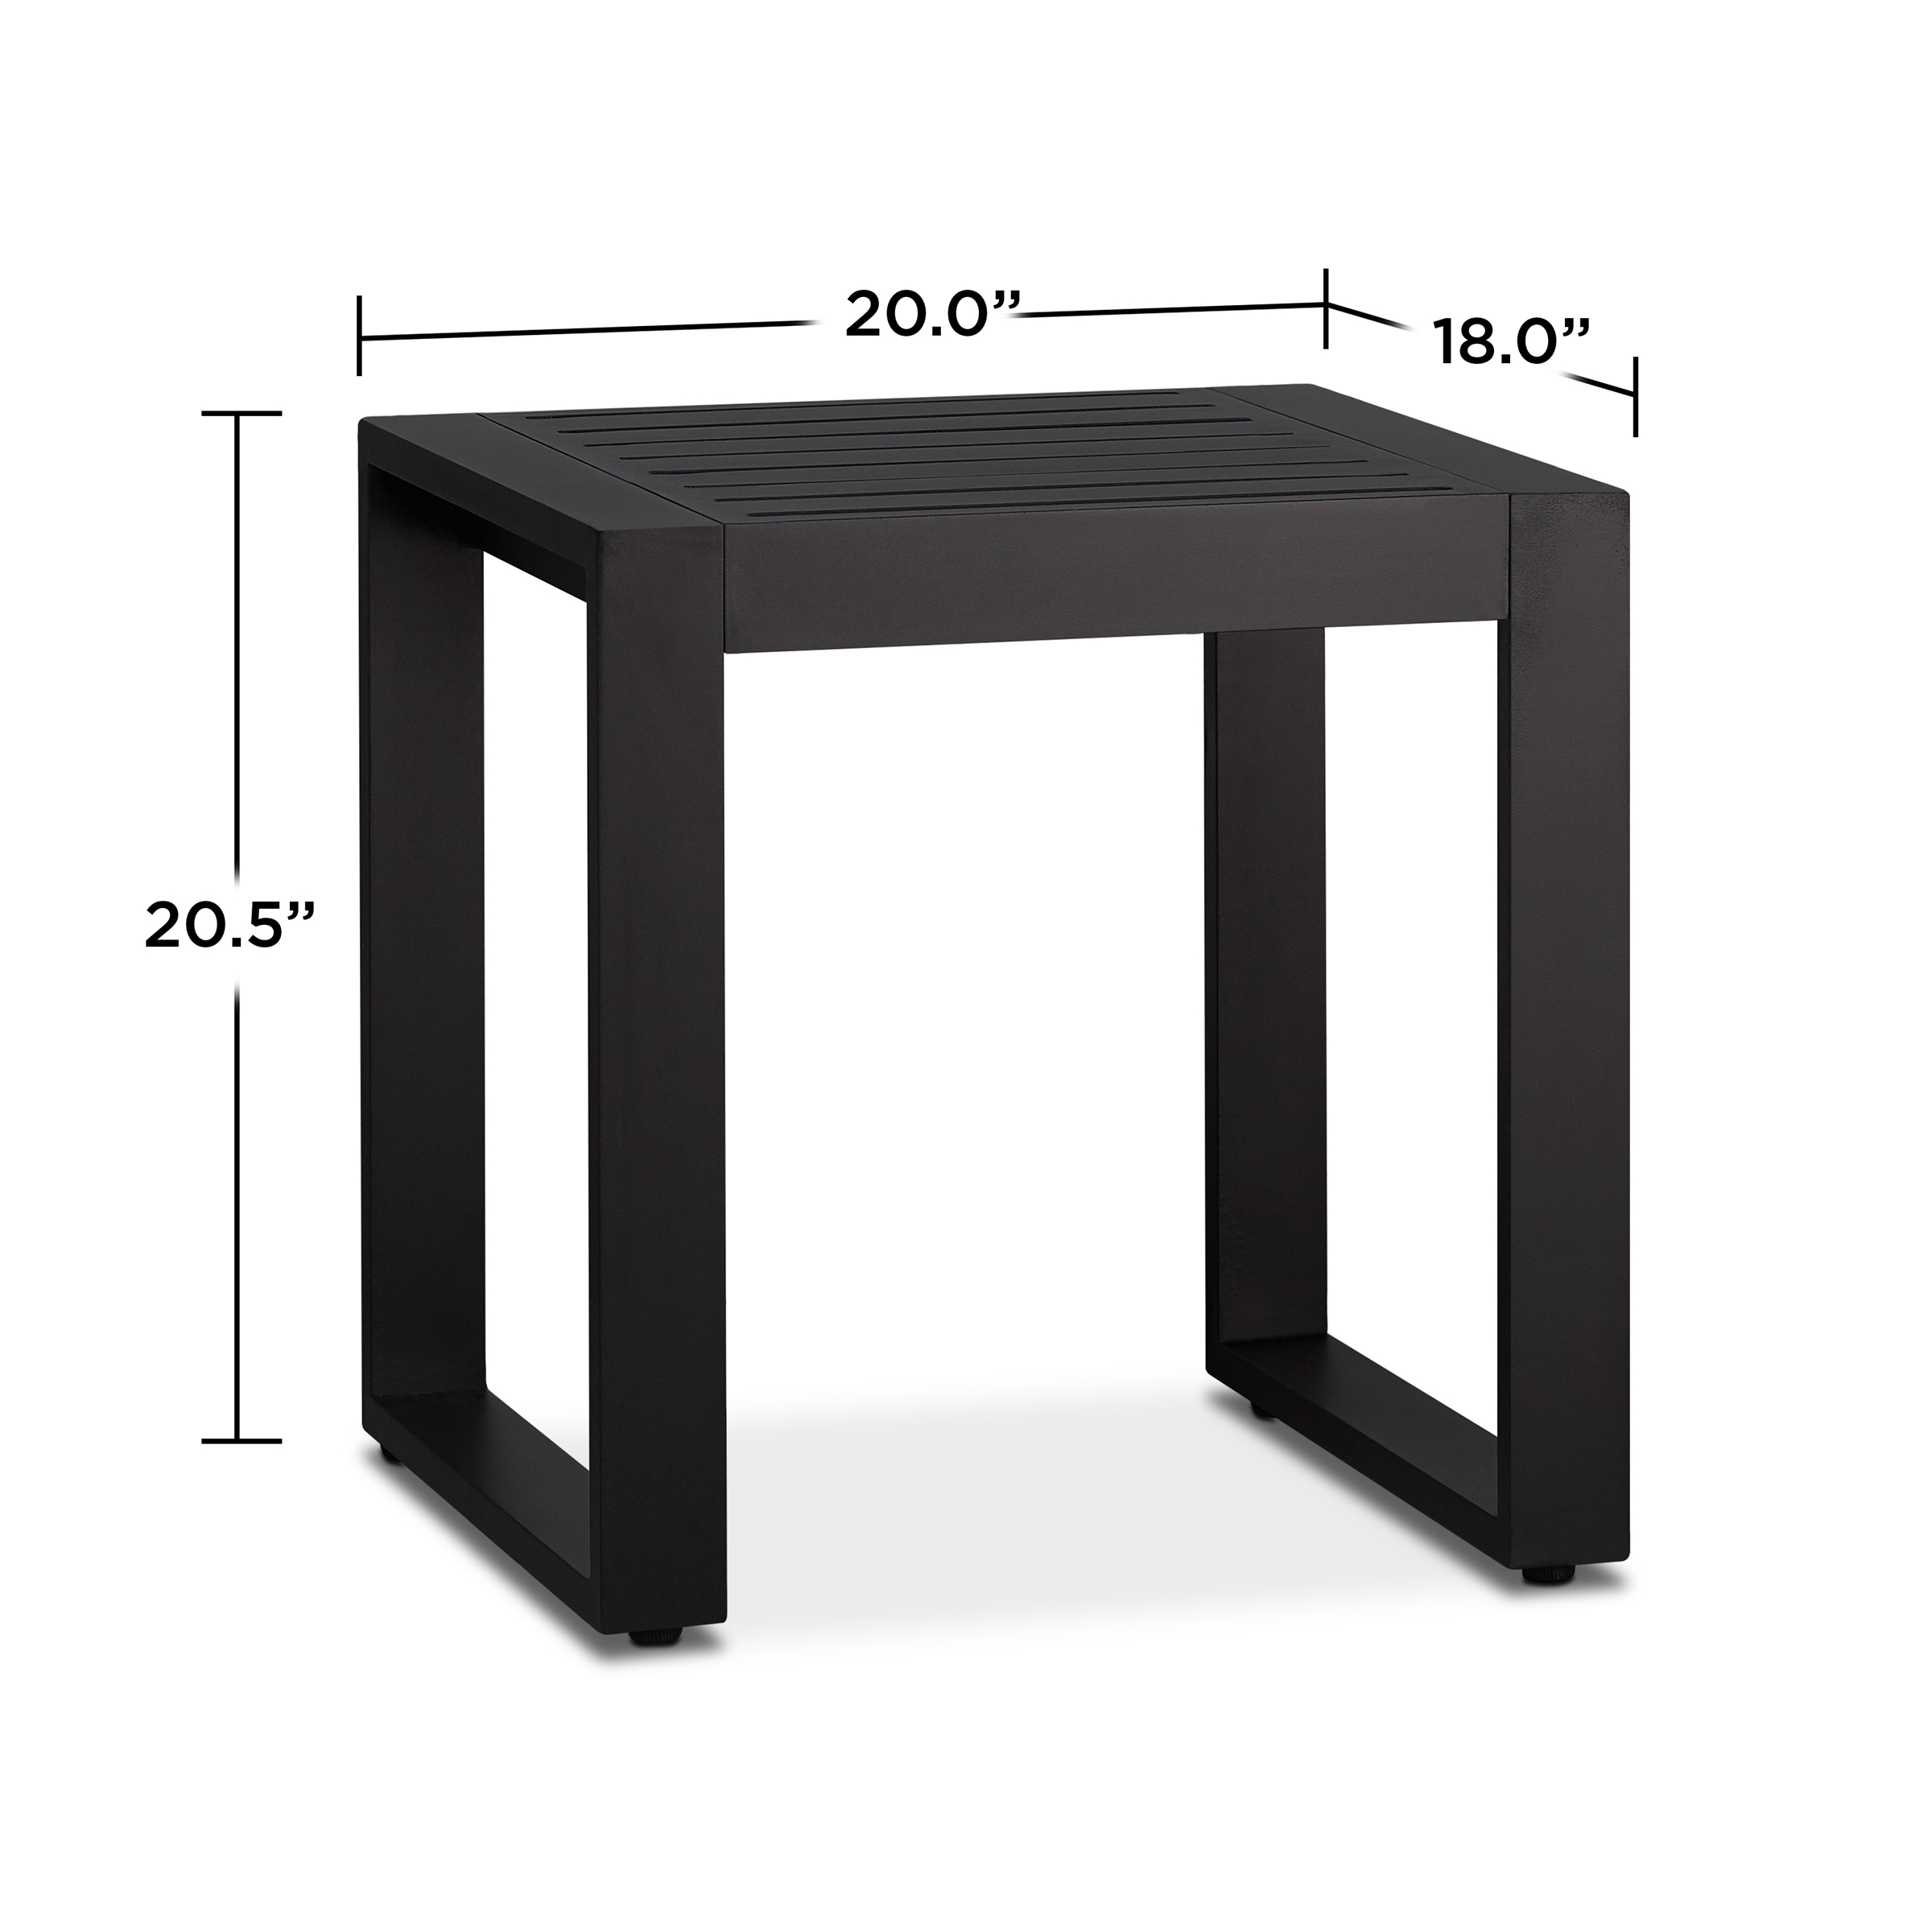 Baltic End Tables in Black Set of Two by Real Flame - image 3 of 3